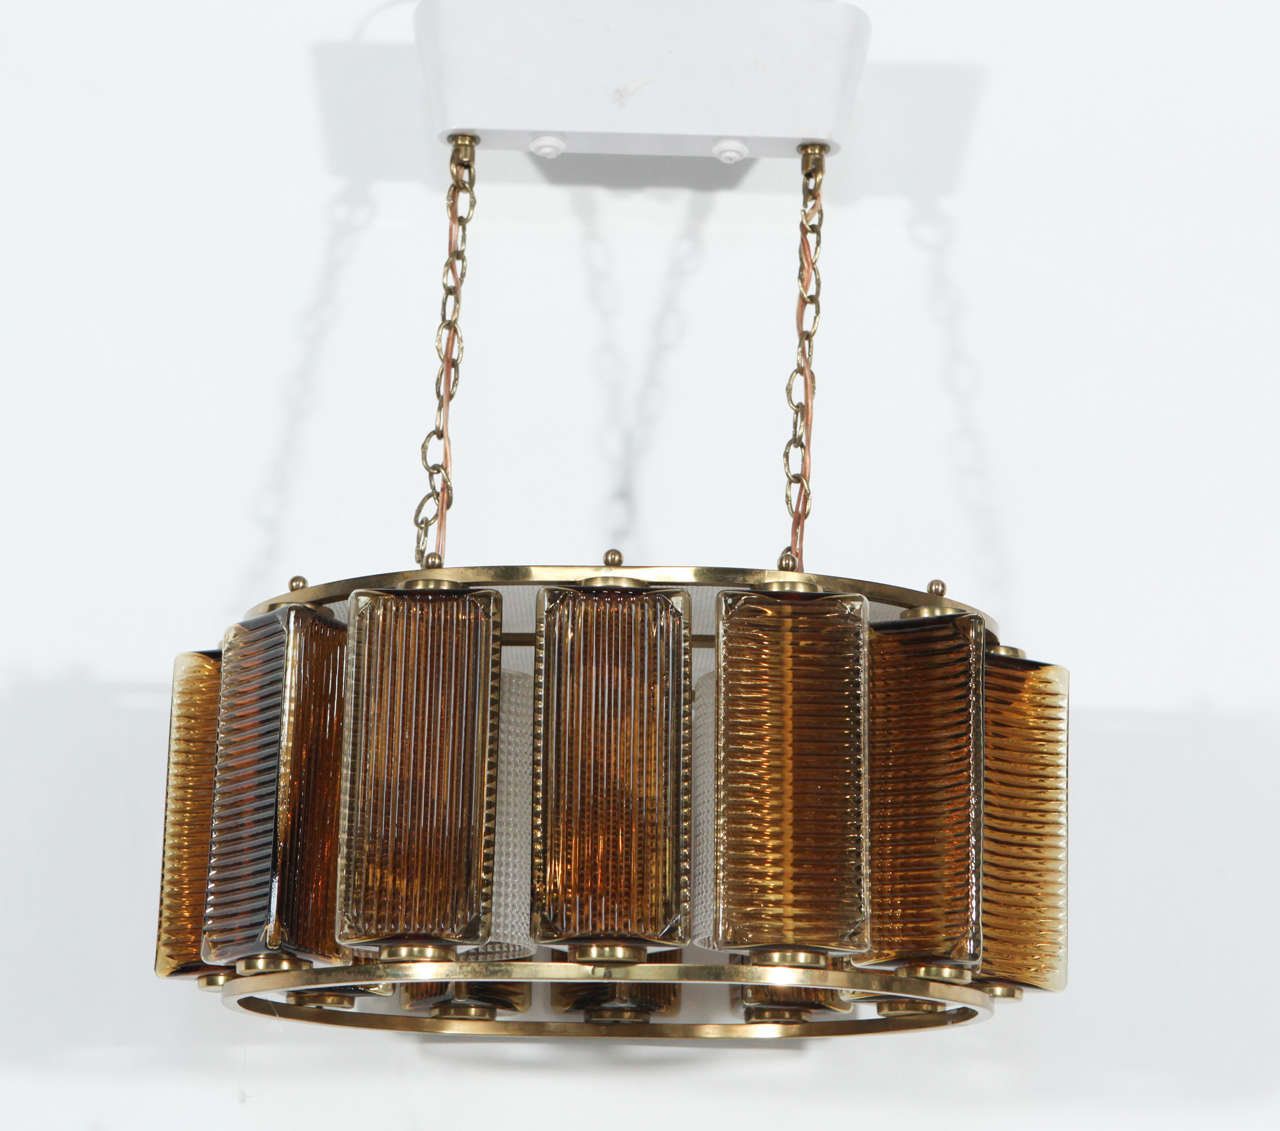 Oval Swedish ceiling light fixture. Brass core and accents, checkered clear glass, fluted brown glass. Rewired. 

